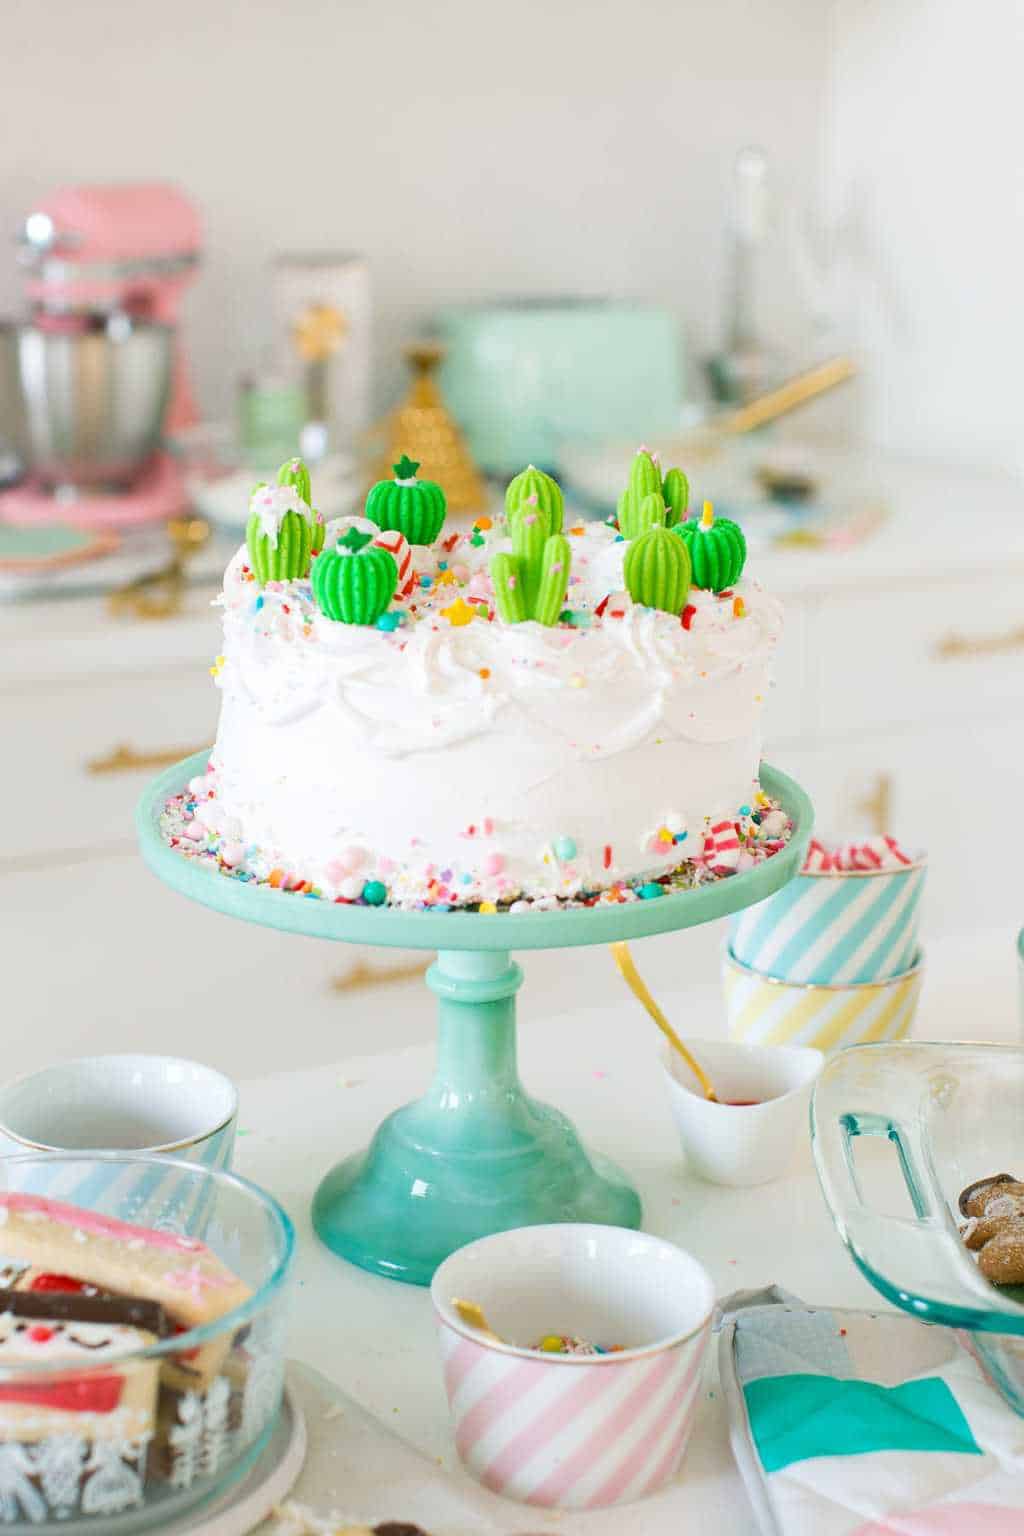 Everything Sweet Cake & Starting A New Holiday Dessert Tradition by top Houston lifestyle blogger Ashley Rose of Sugar & Cloth